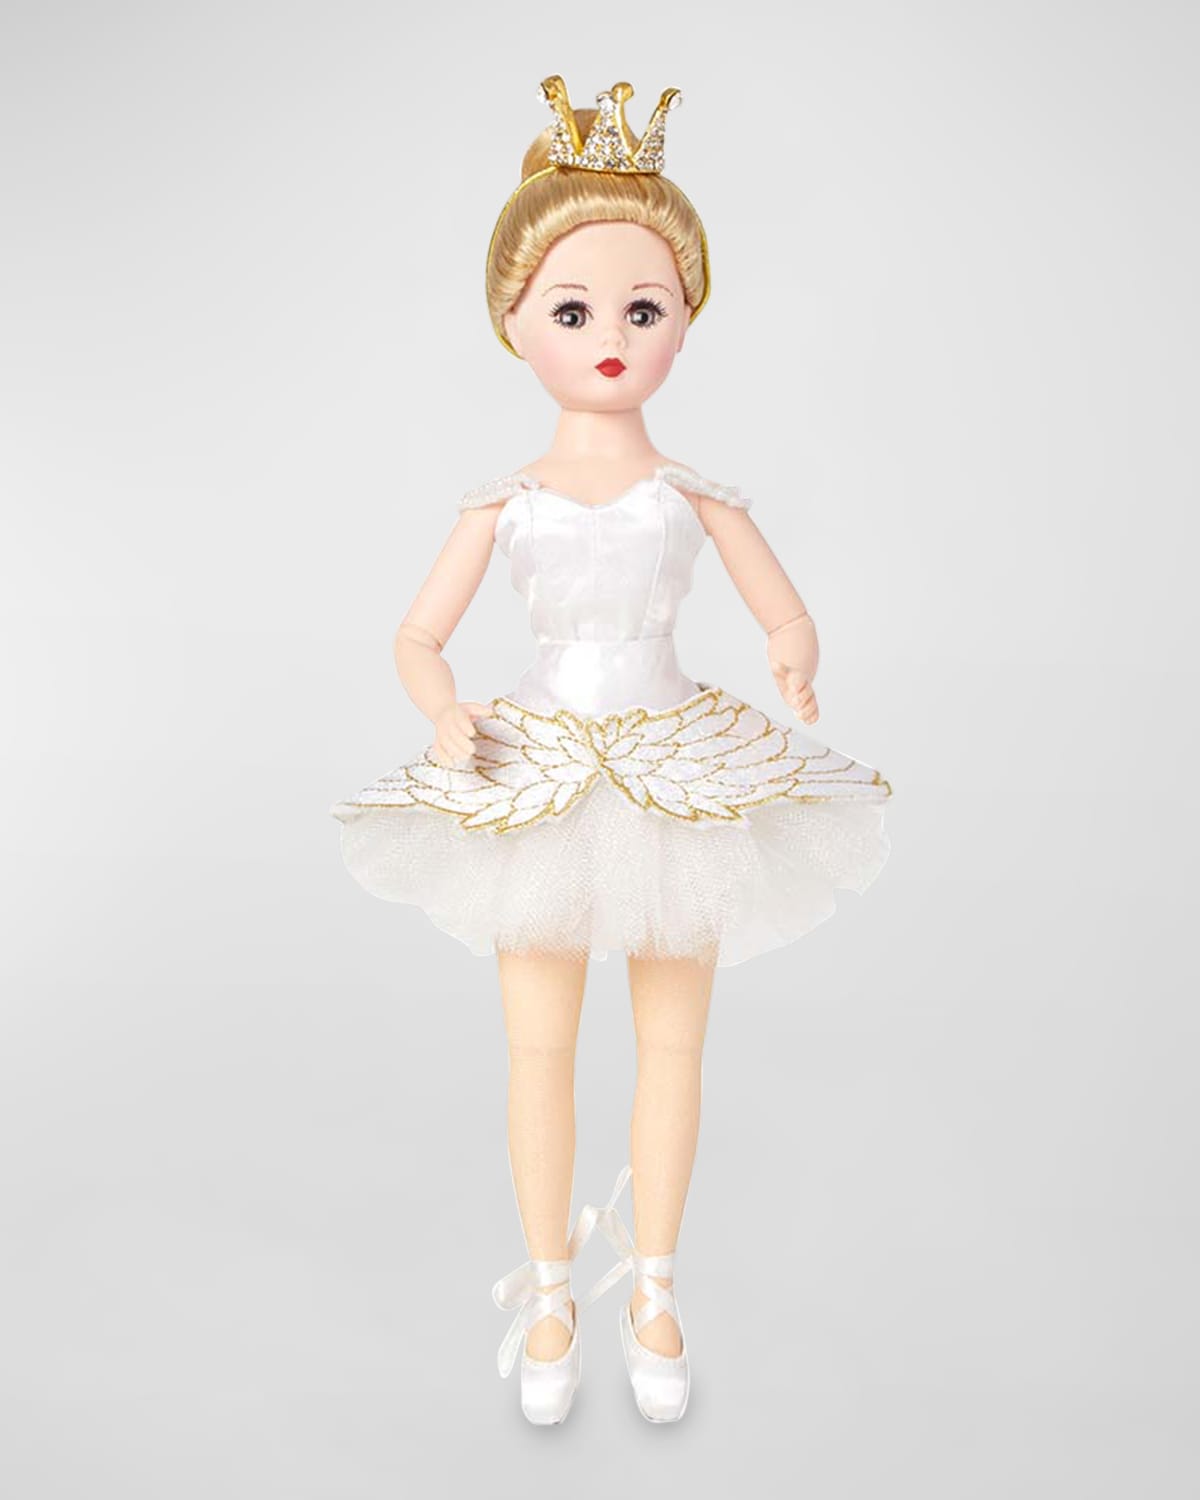 Collectible Doll | Neiman Marcus